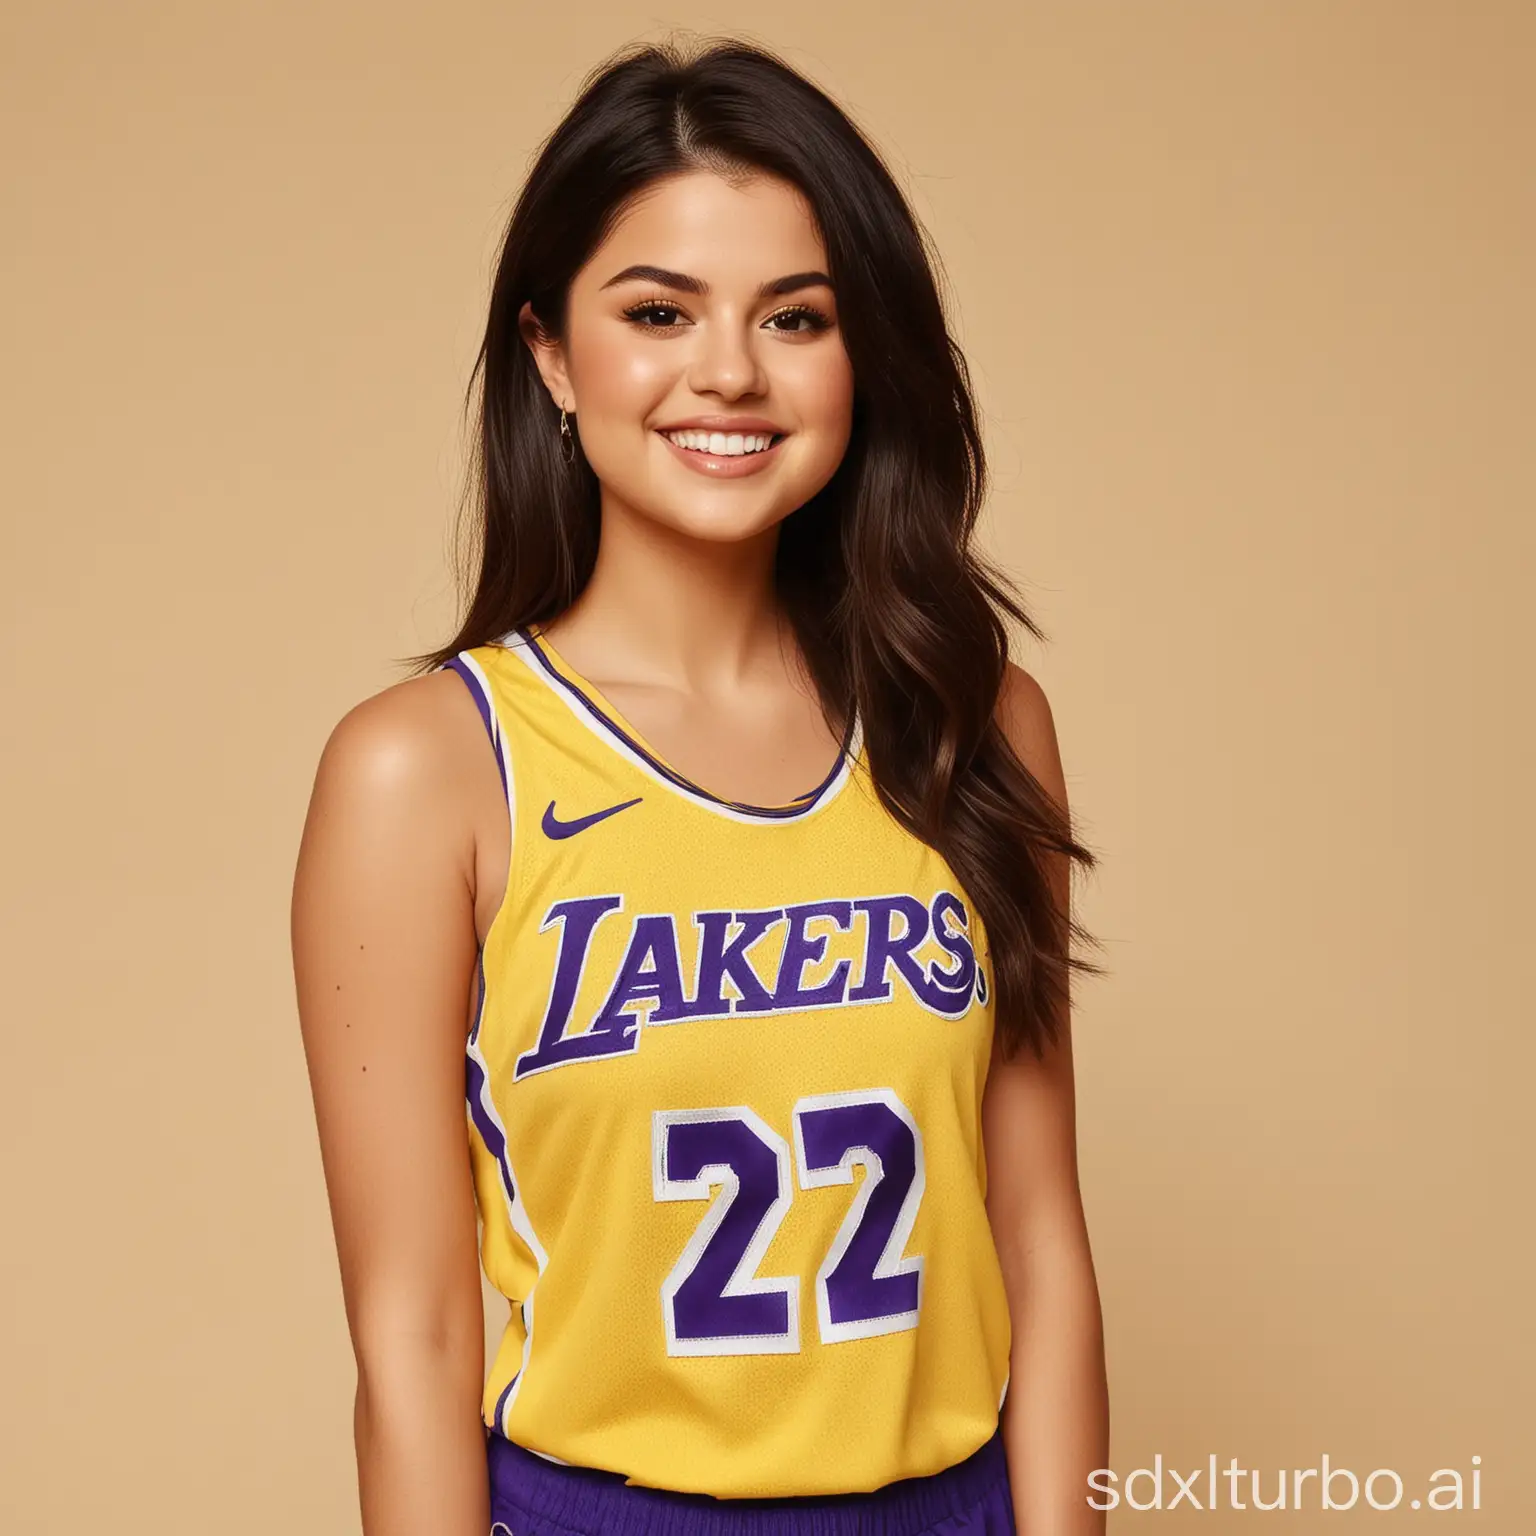 selena gomez smiling front yellow lakers jersey number twelve bege background